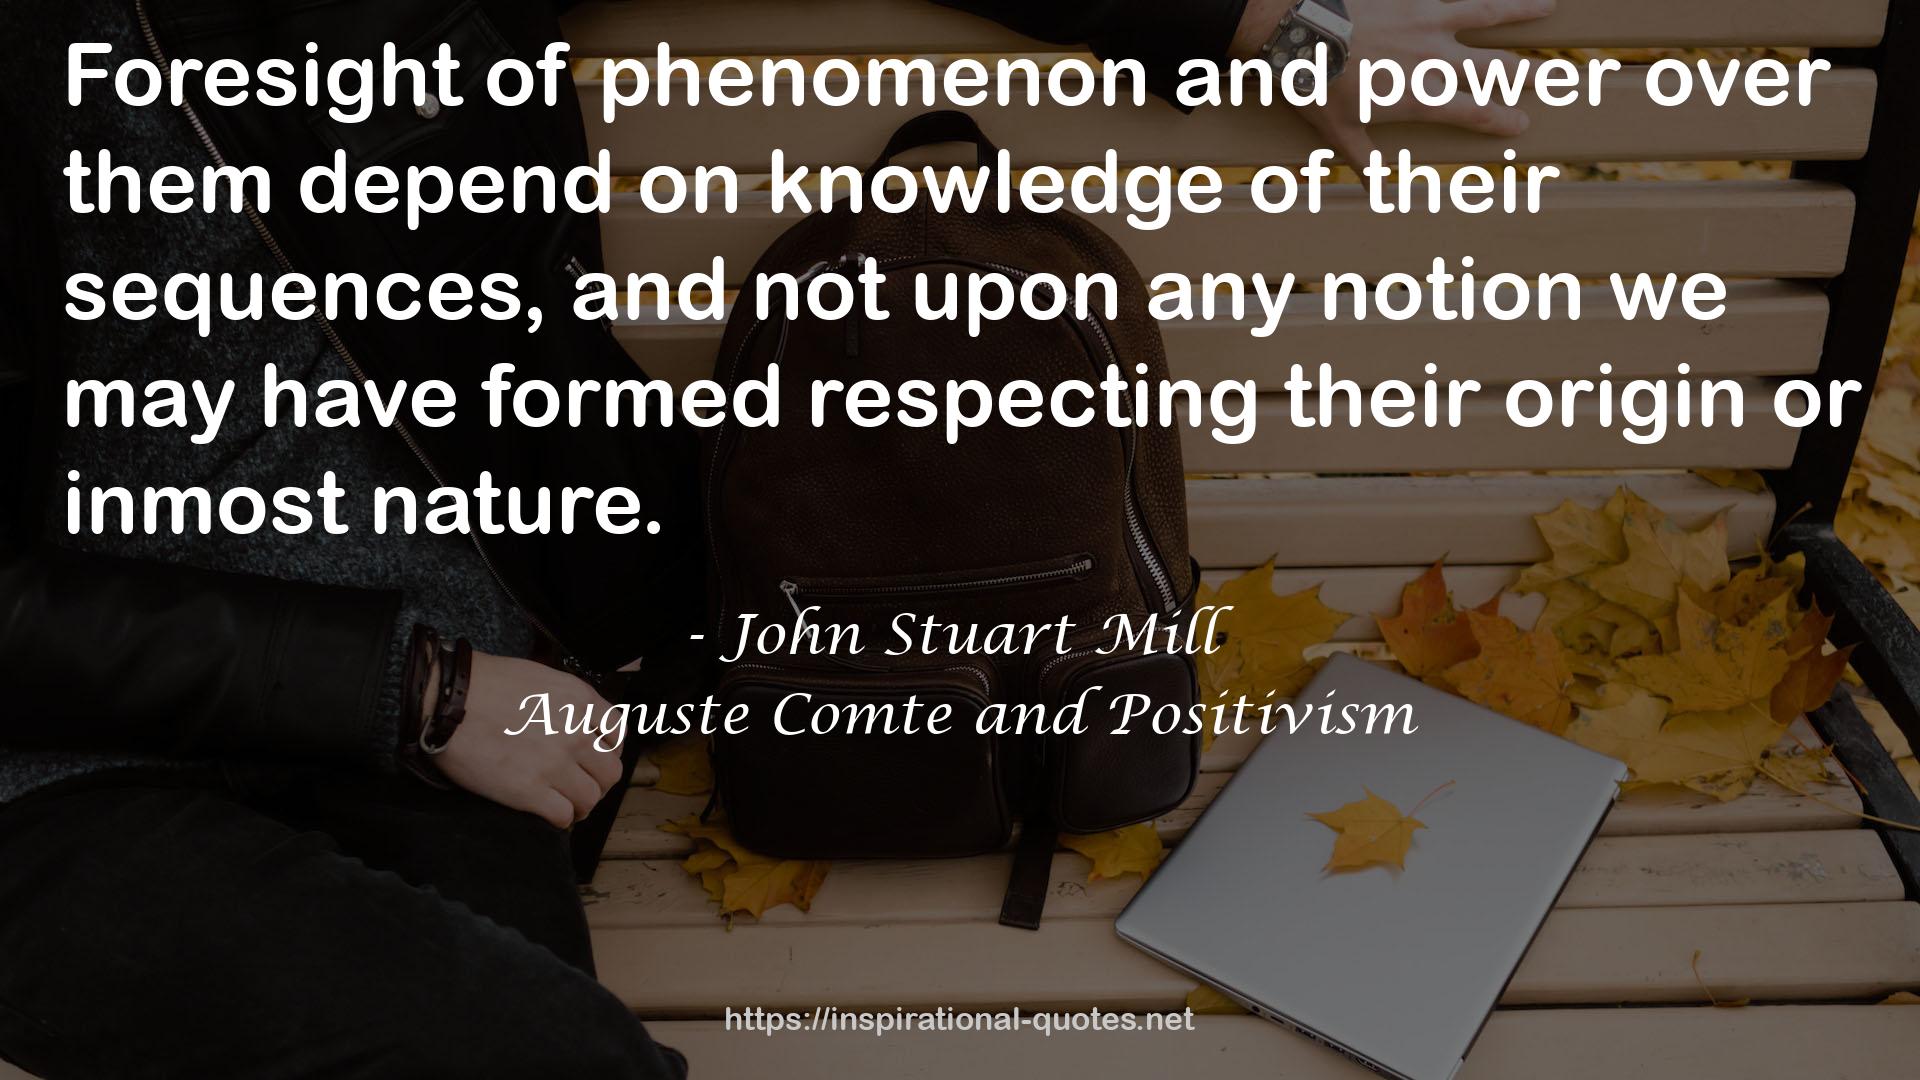 Auguste Comte and Positivism QUOTES